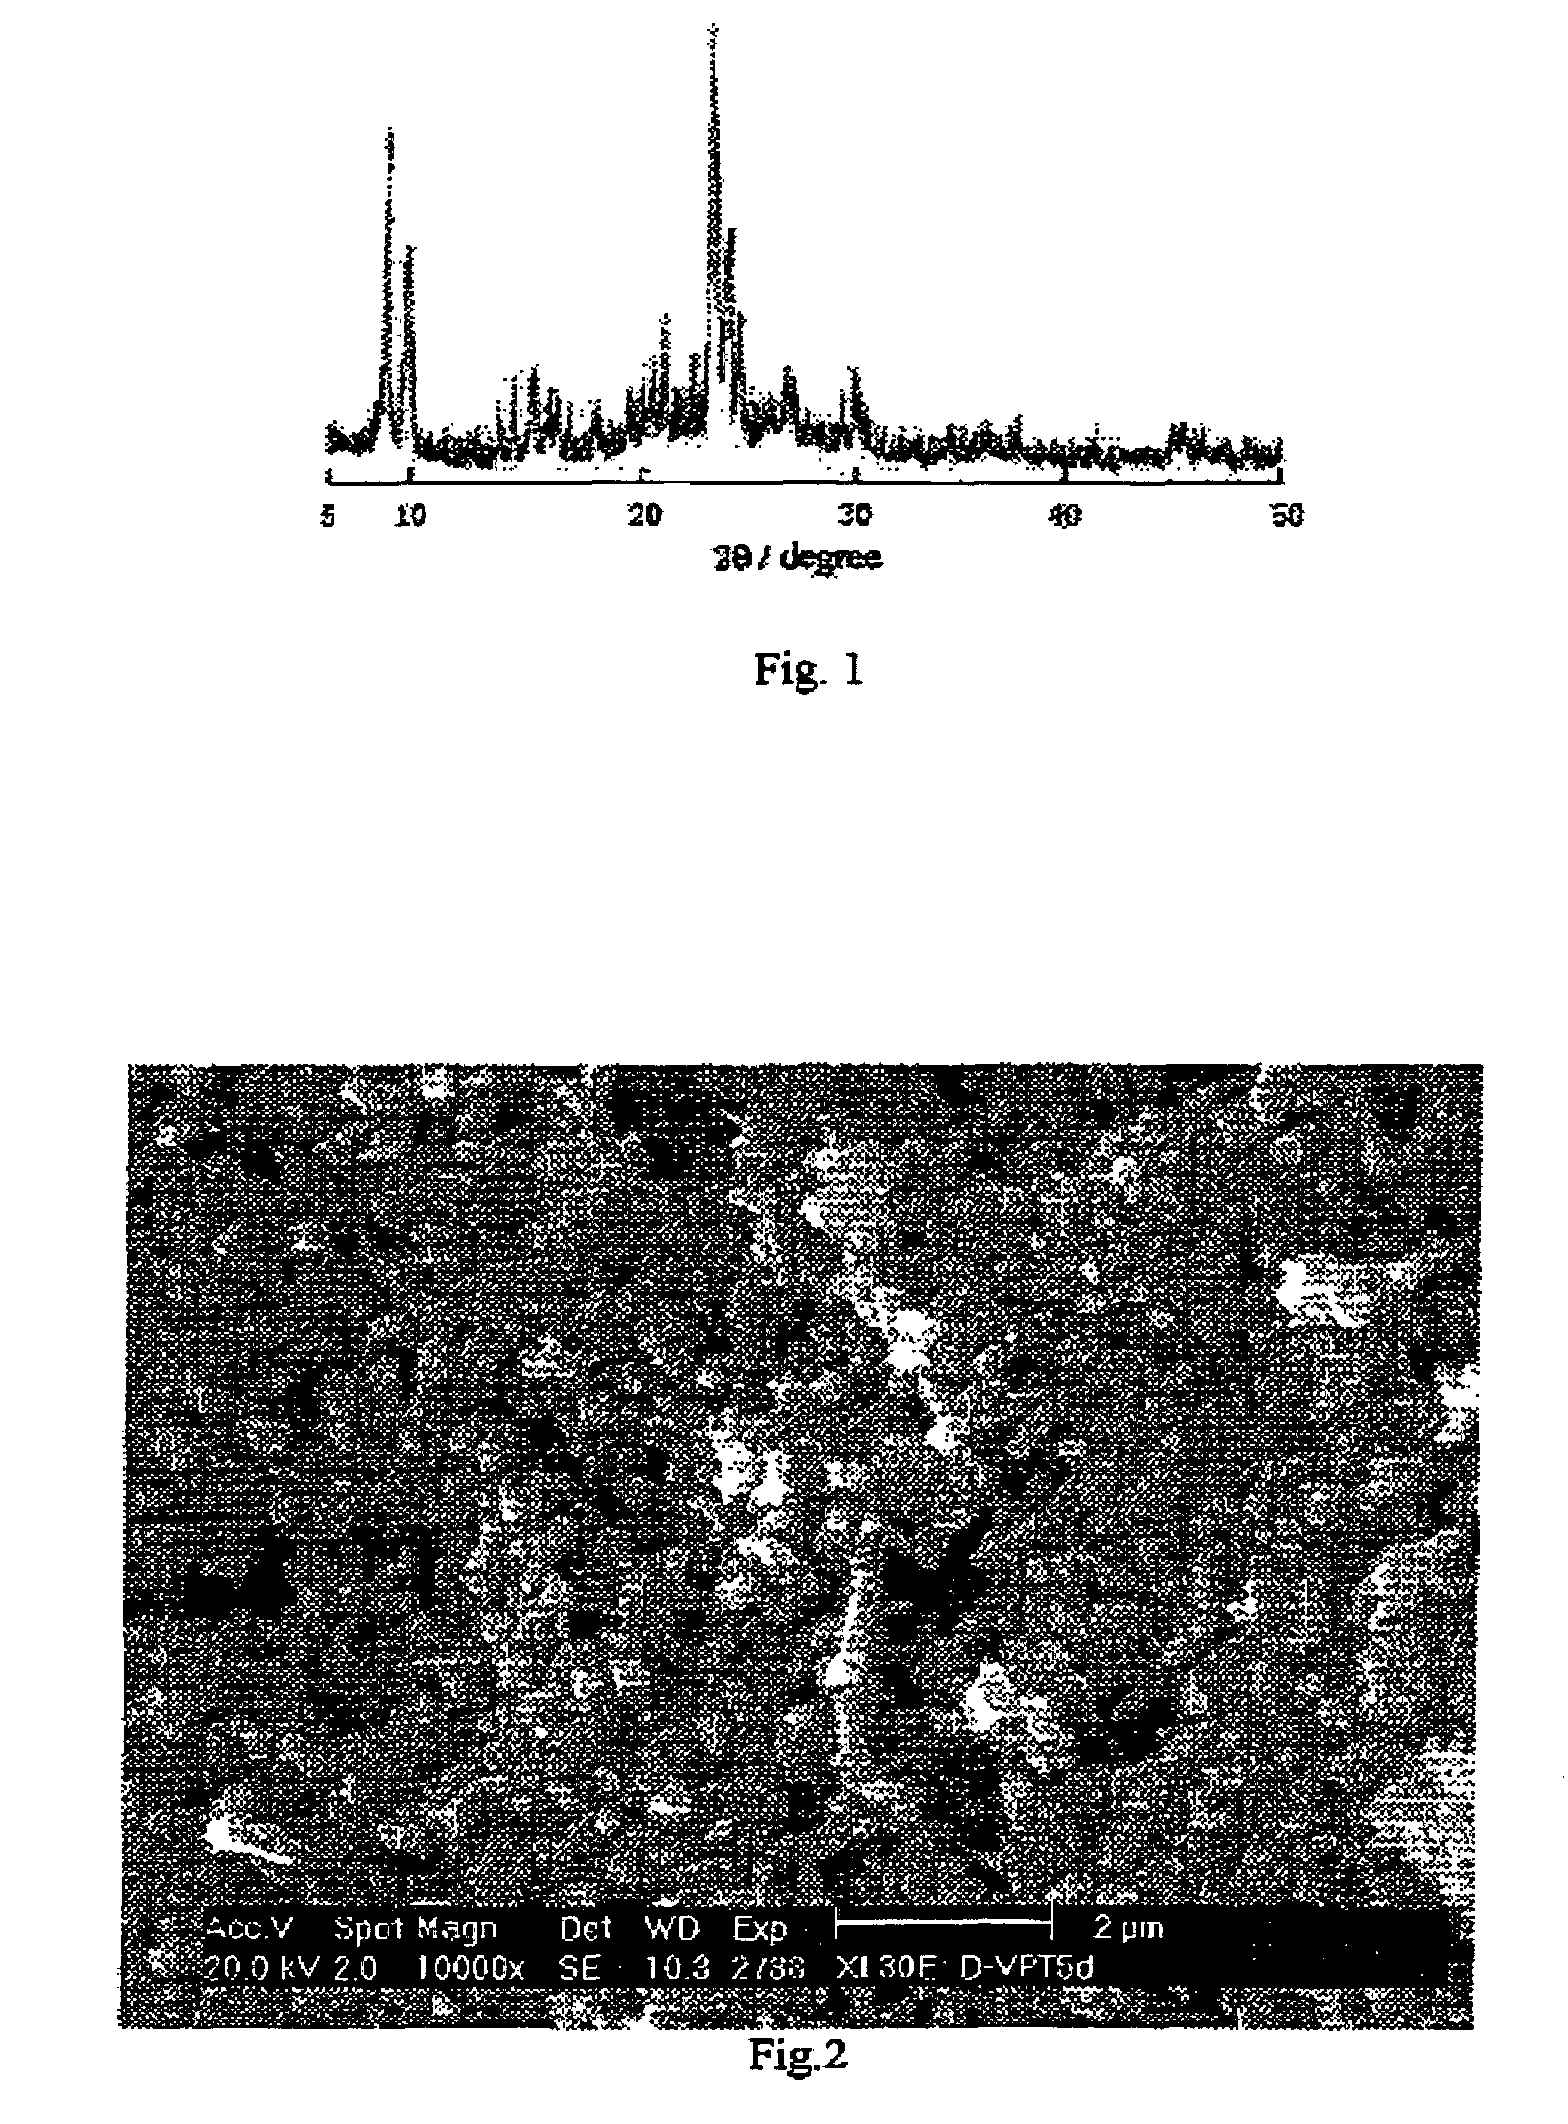 Process for producing binder-free ZSM-5 zeolite in small crystal size